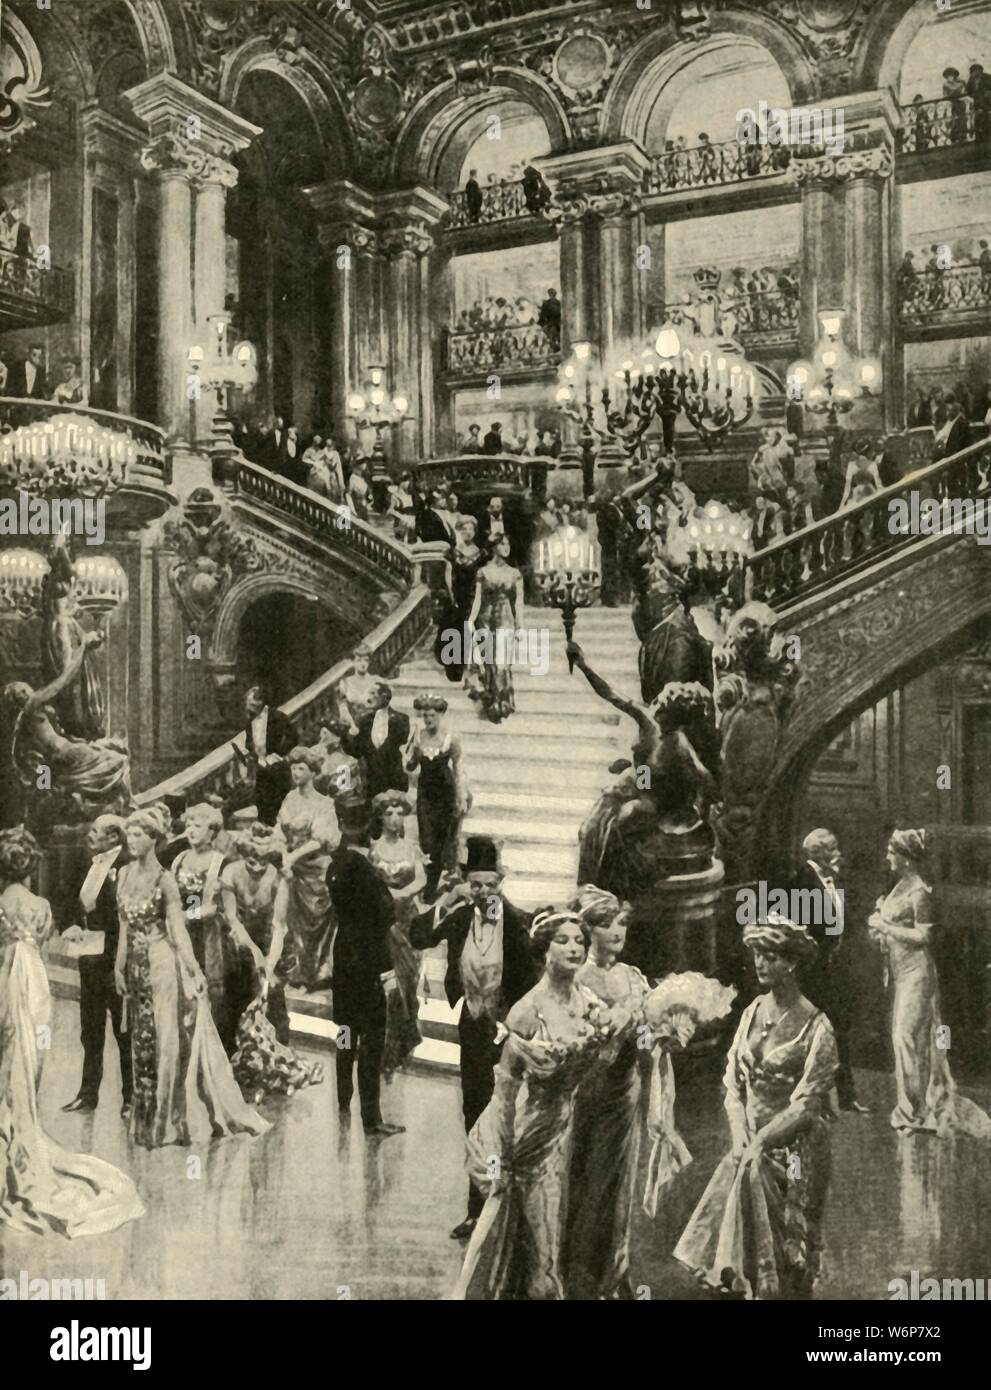 'The Opera in Paris', 1910. 'The Grand Staircase, which provides for French Society a substitute for the splendour and brilliancy of Royal Courts.' From &quot;The Strand Magazine, an illustrated monthly&quot;, Volume XL - July to December 1910. [George Newnes Ltd, London, 1910] Stock Photo